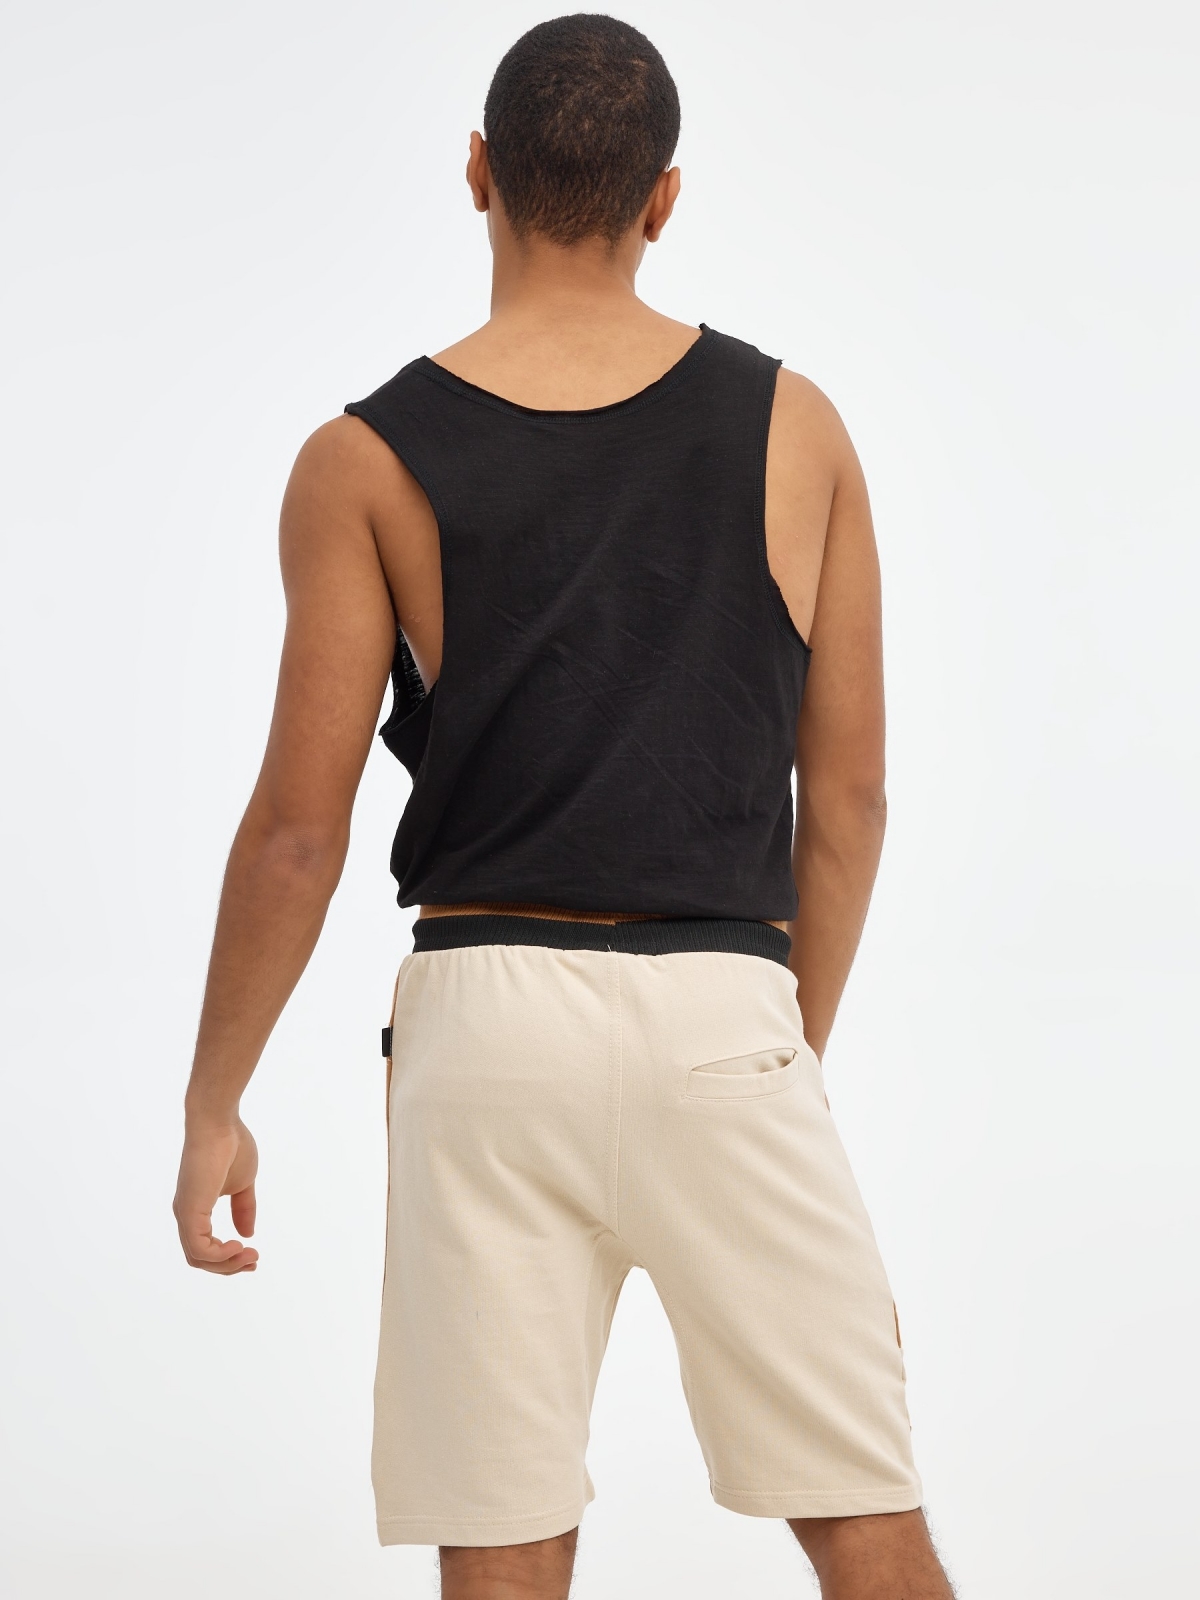 Bermuda jogger shorts color block sand middle back view